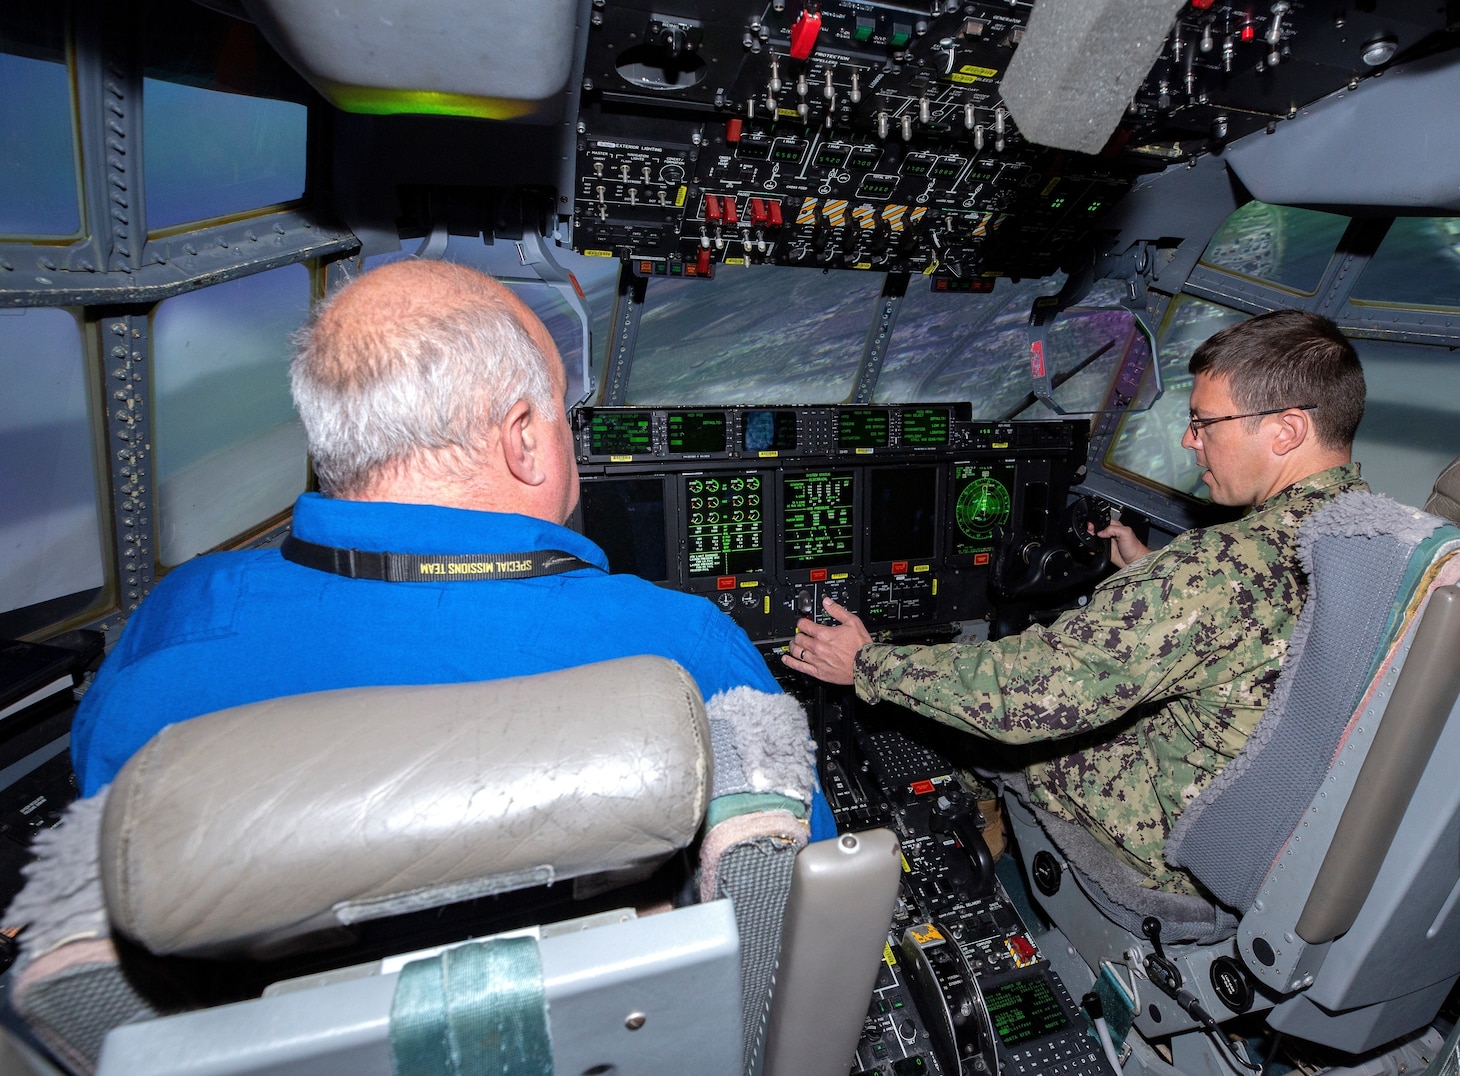 Captain Damon Hildebrand, Branch Head, Reserve Enabling Requirements, Office of the Chief of Navy Reserve (right) is seated at the flight controls of a C-130J Hercules simulator during his visit to the historic United States Air Force Plant 6 in Marietta, Georgia, the production facility for the latest generation of the C-130 Hercules. Lockheed Martin Photography by David L. Key. November 8, 2022